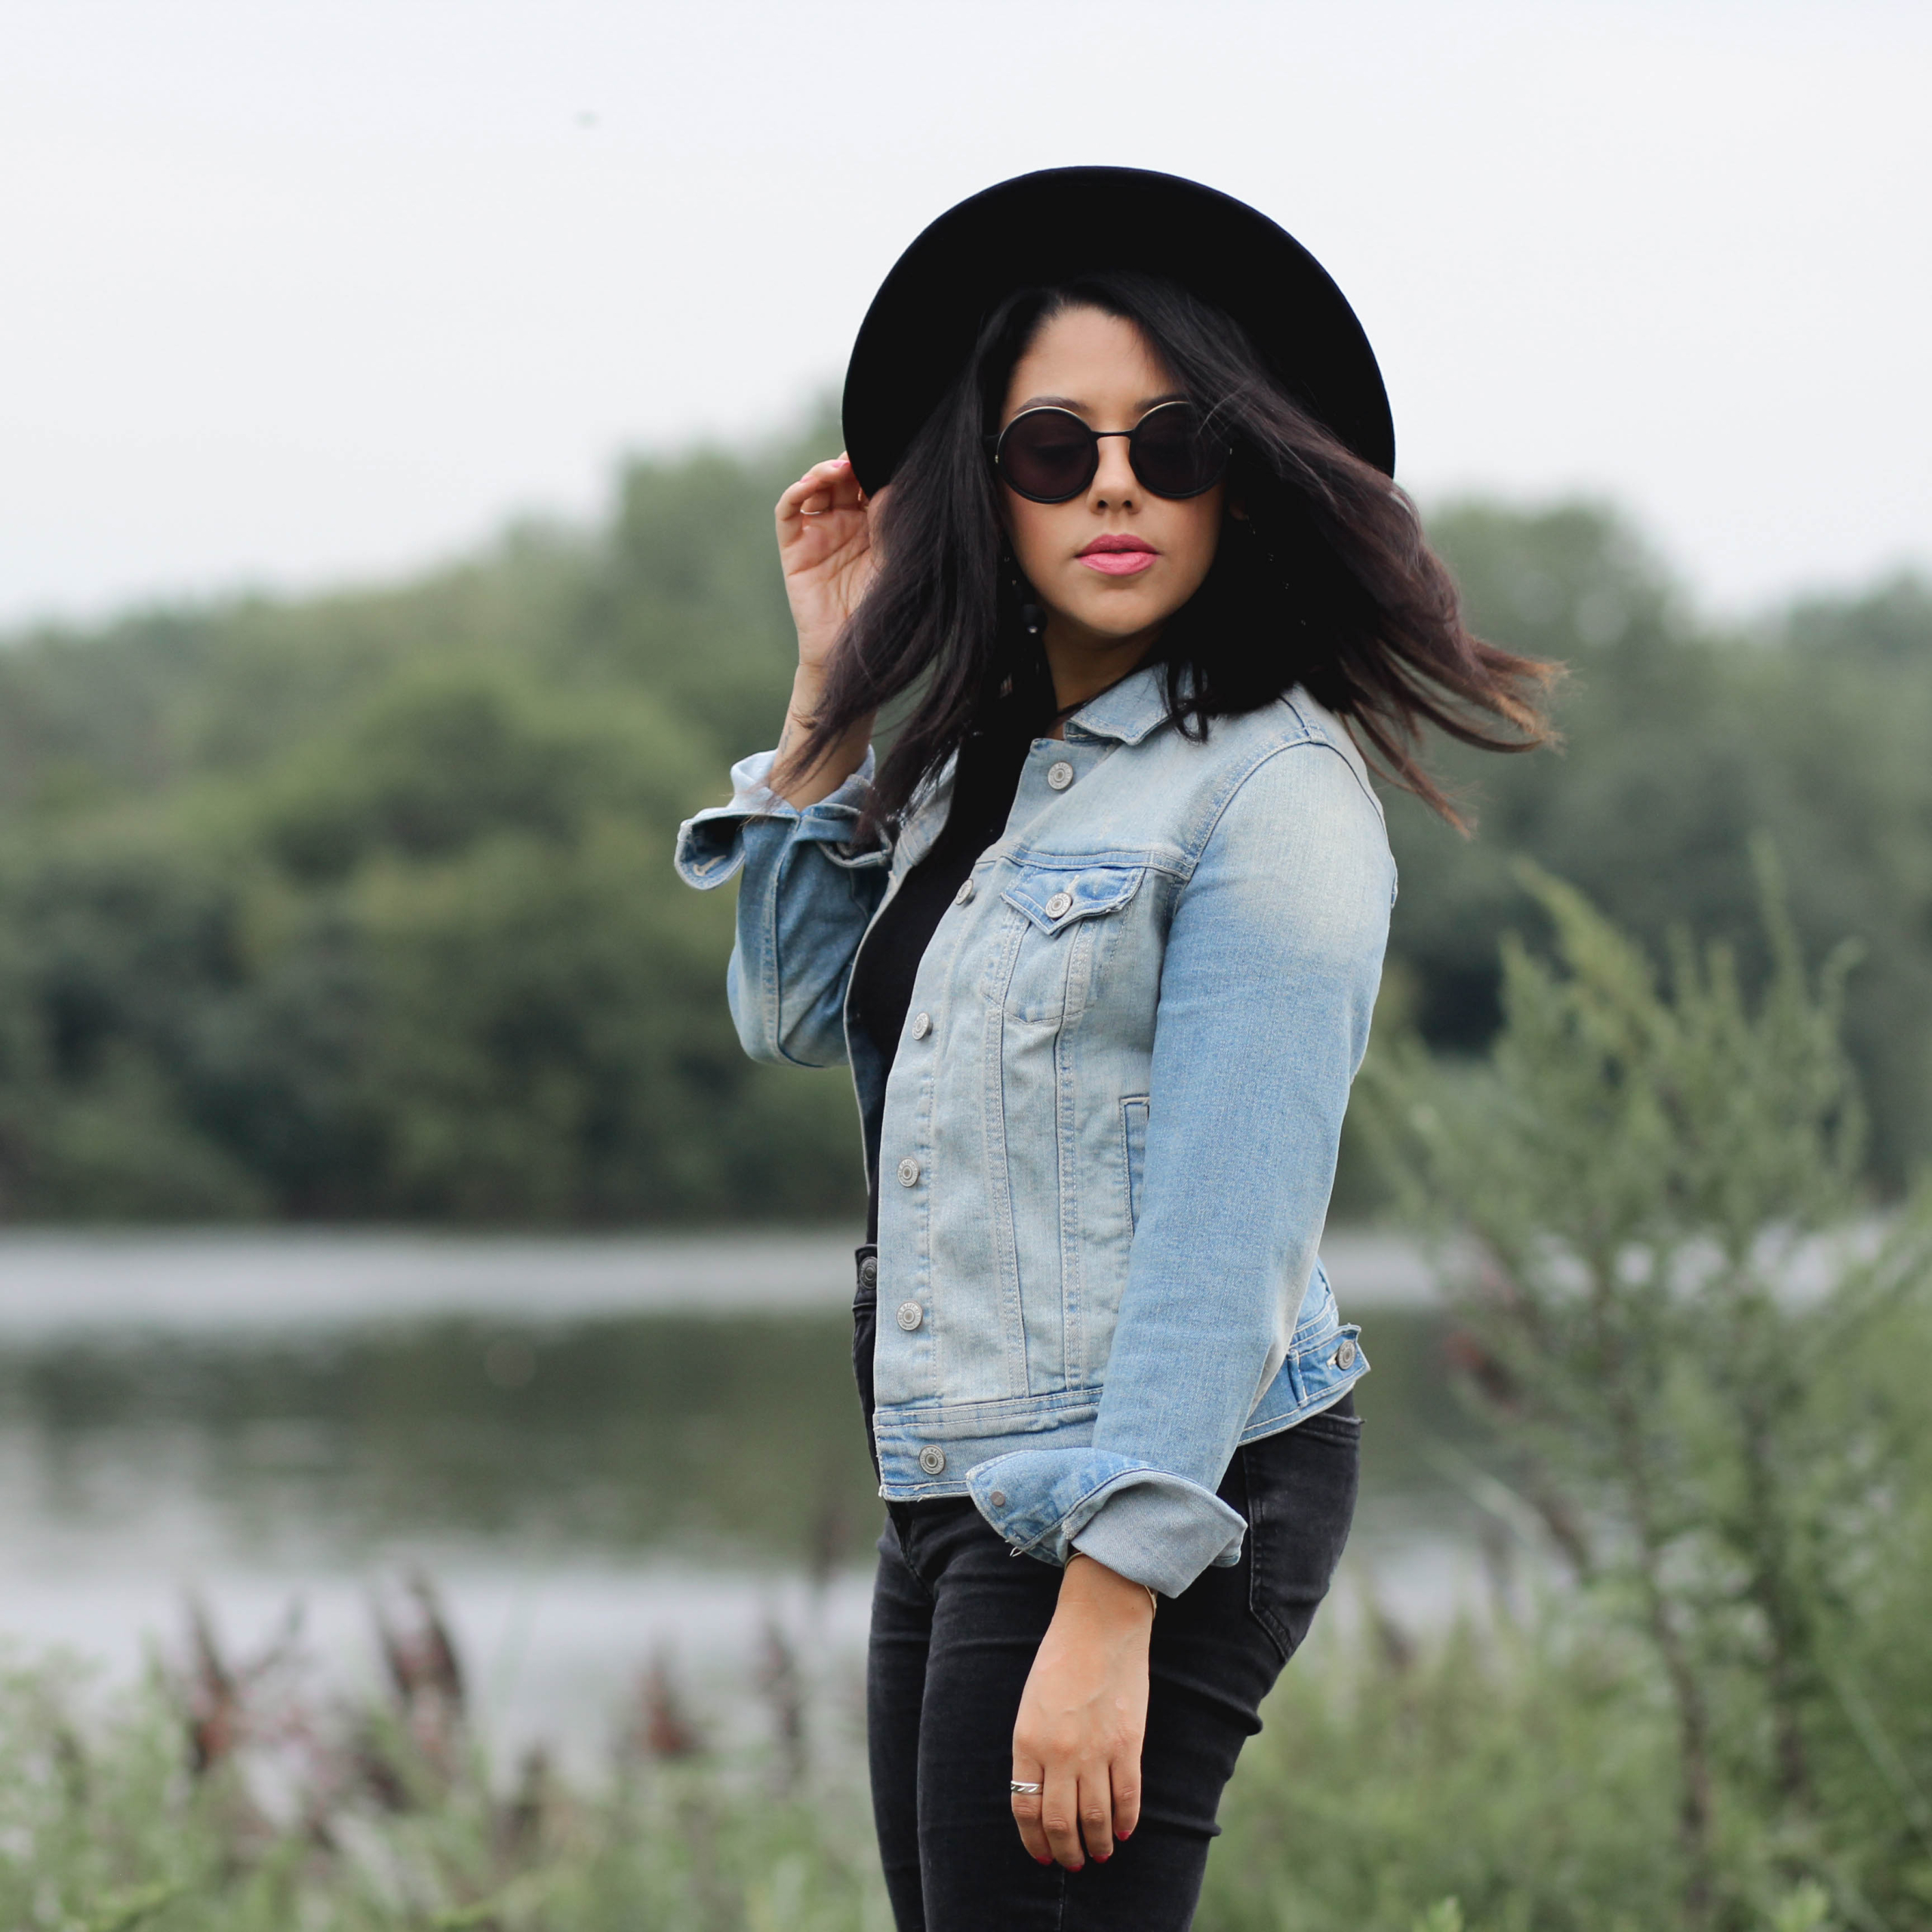 Lifestyle Blogger Naty Michele wearing a denim jacket with a black hat